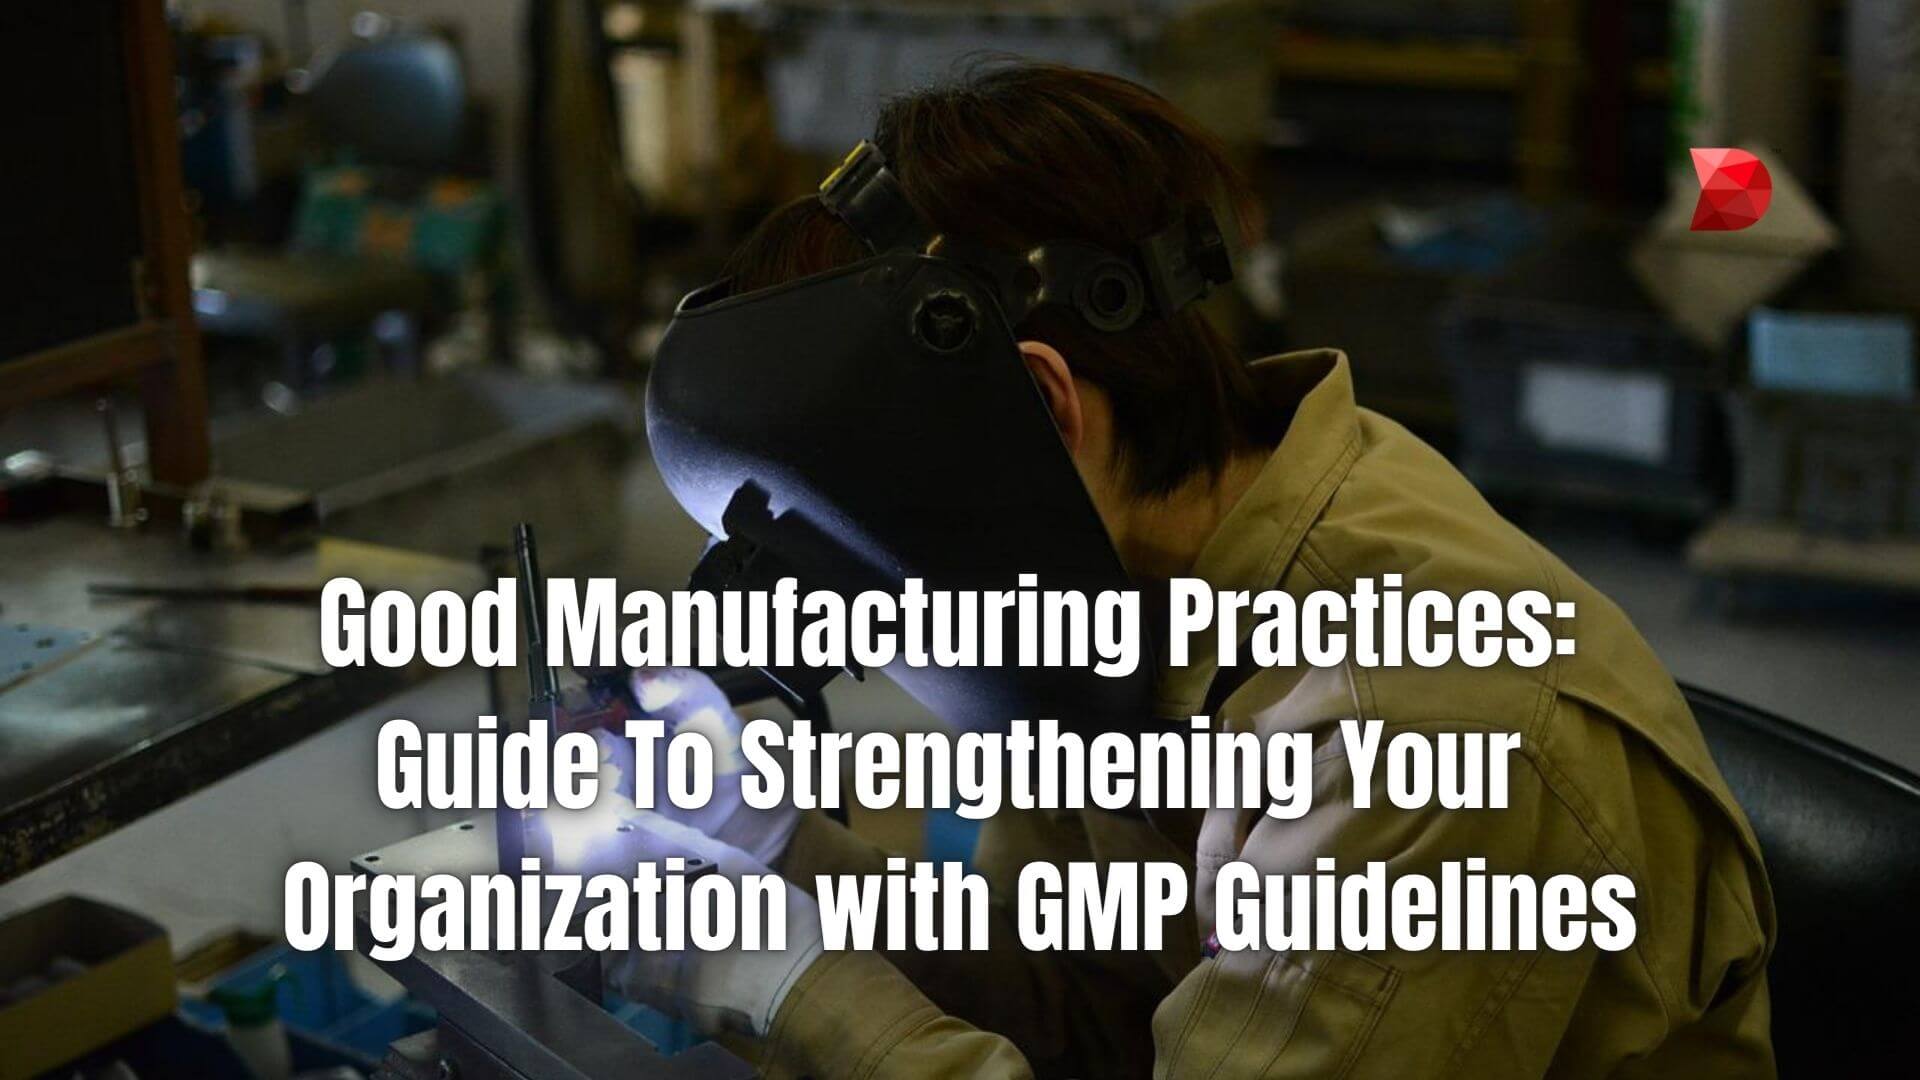 Good Manufacturing Practices Guide To Strengthening Your Organization with GMP Guidelines